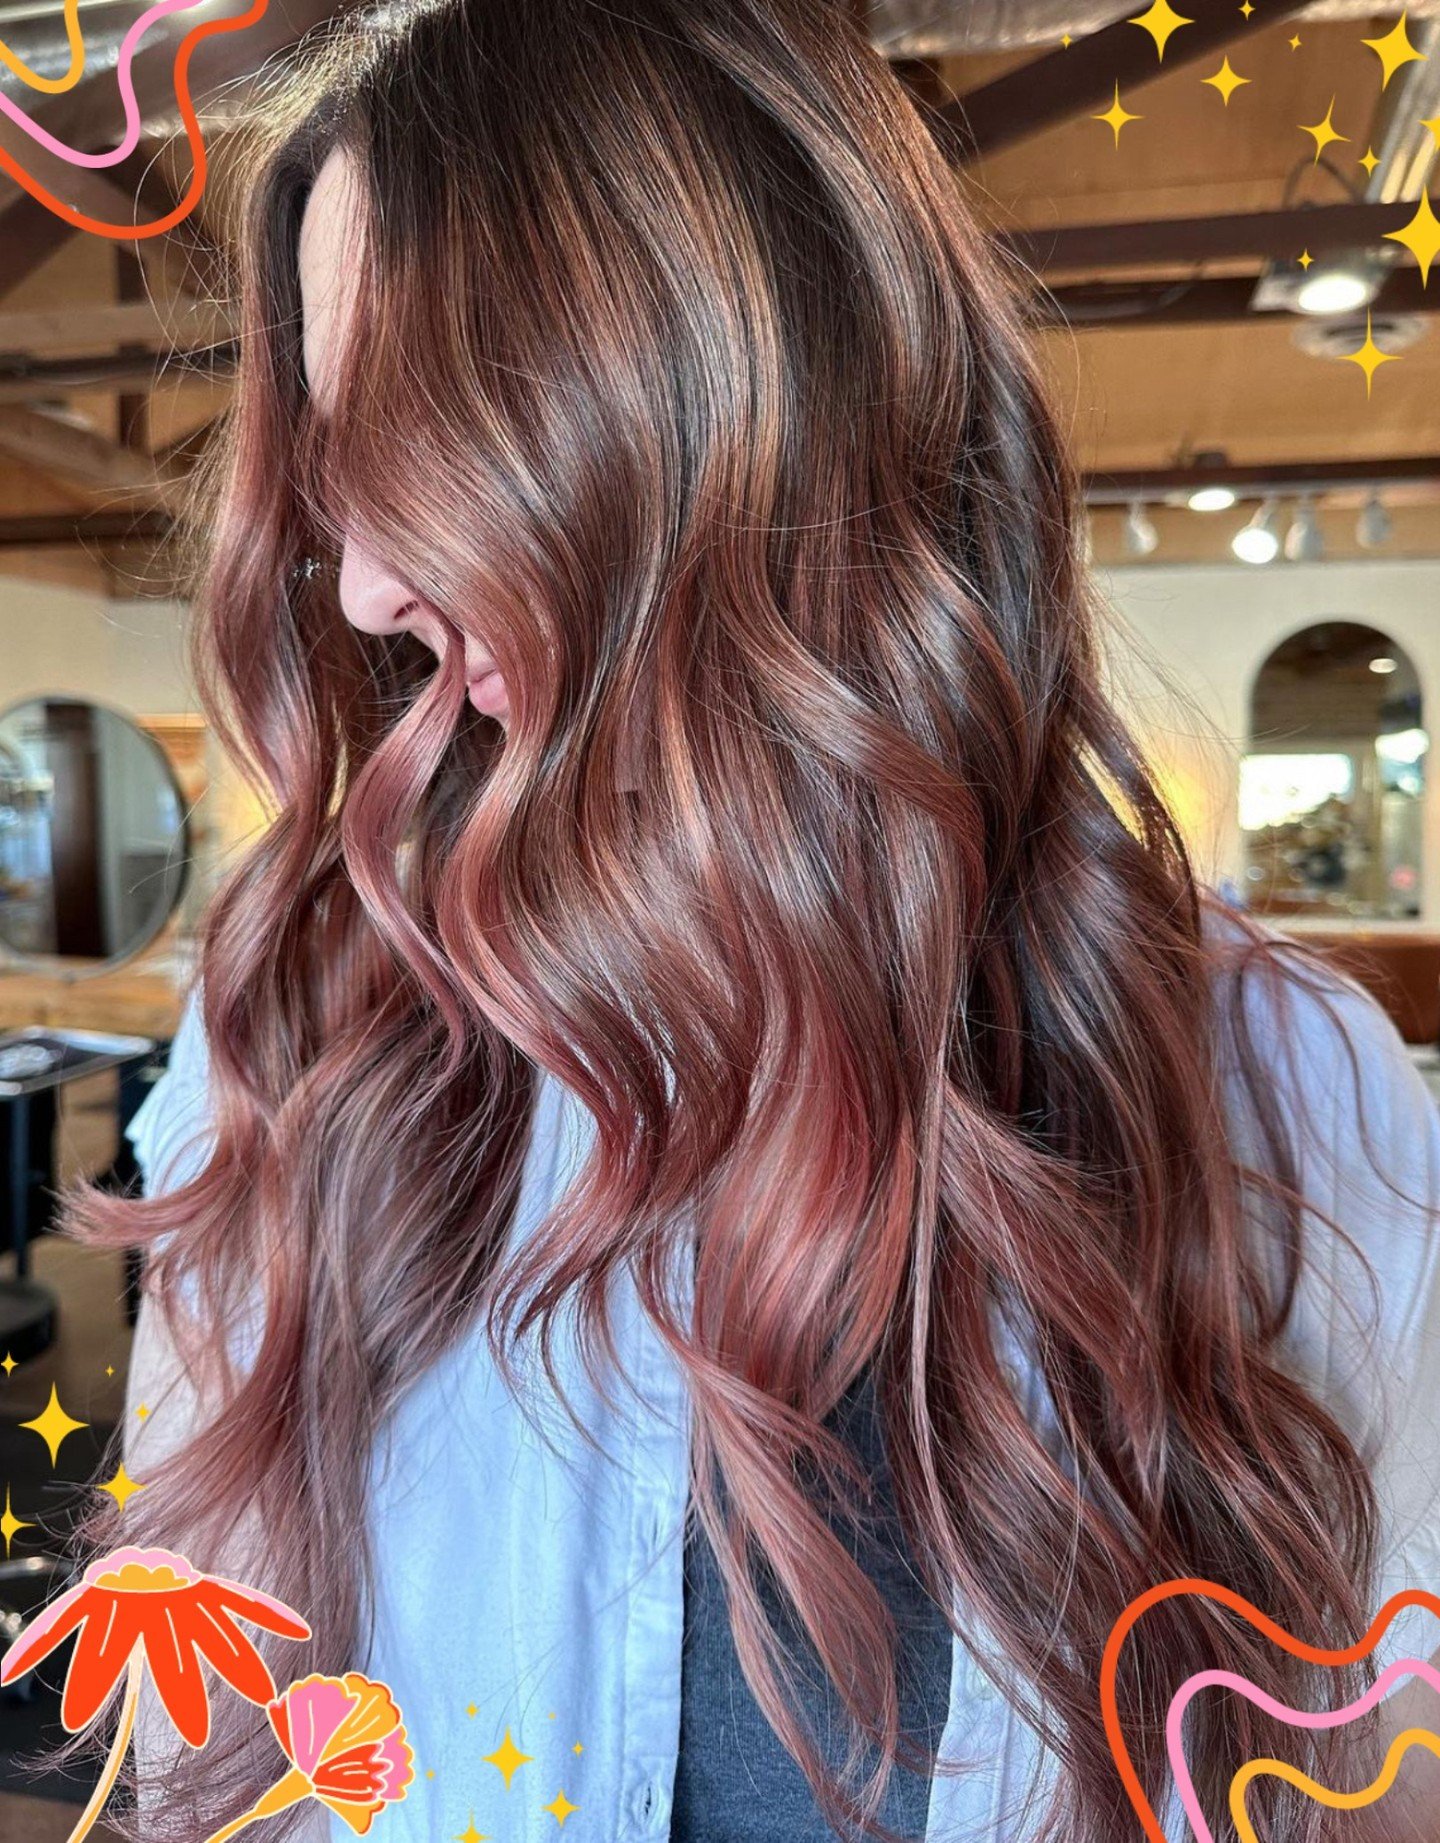 First time going for that BOLD rose gold! 🌟💖 Kaylnn did a full teasy-light and tone, using all the best shades to achieve this stunning look. Check out @cosmokalynn's profile and don't forget to book your appointment while you're there! 
*
*
*
*
*
